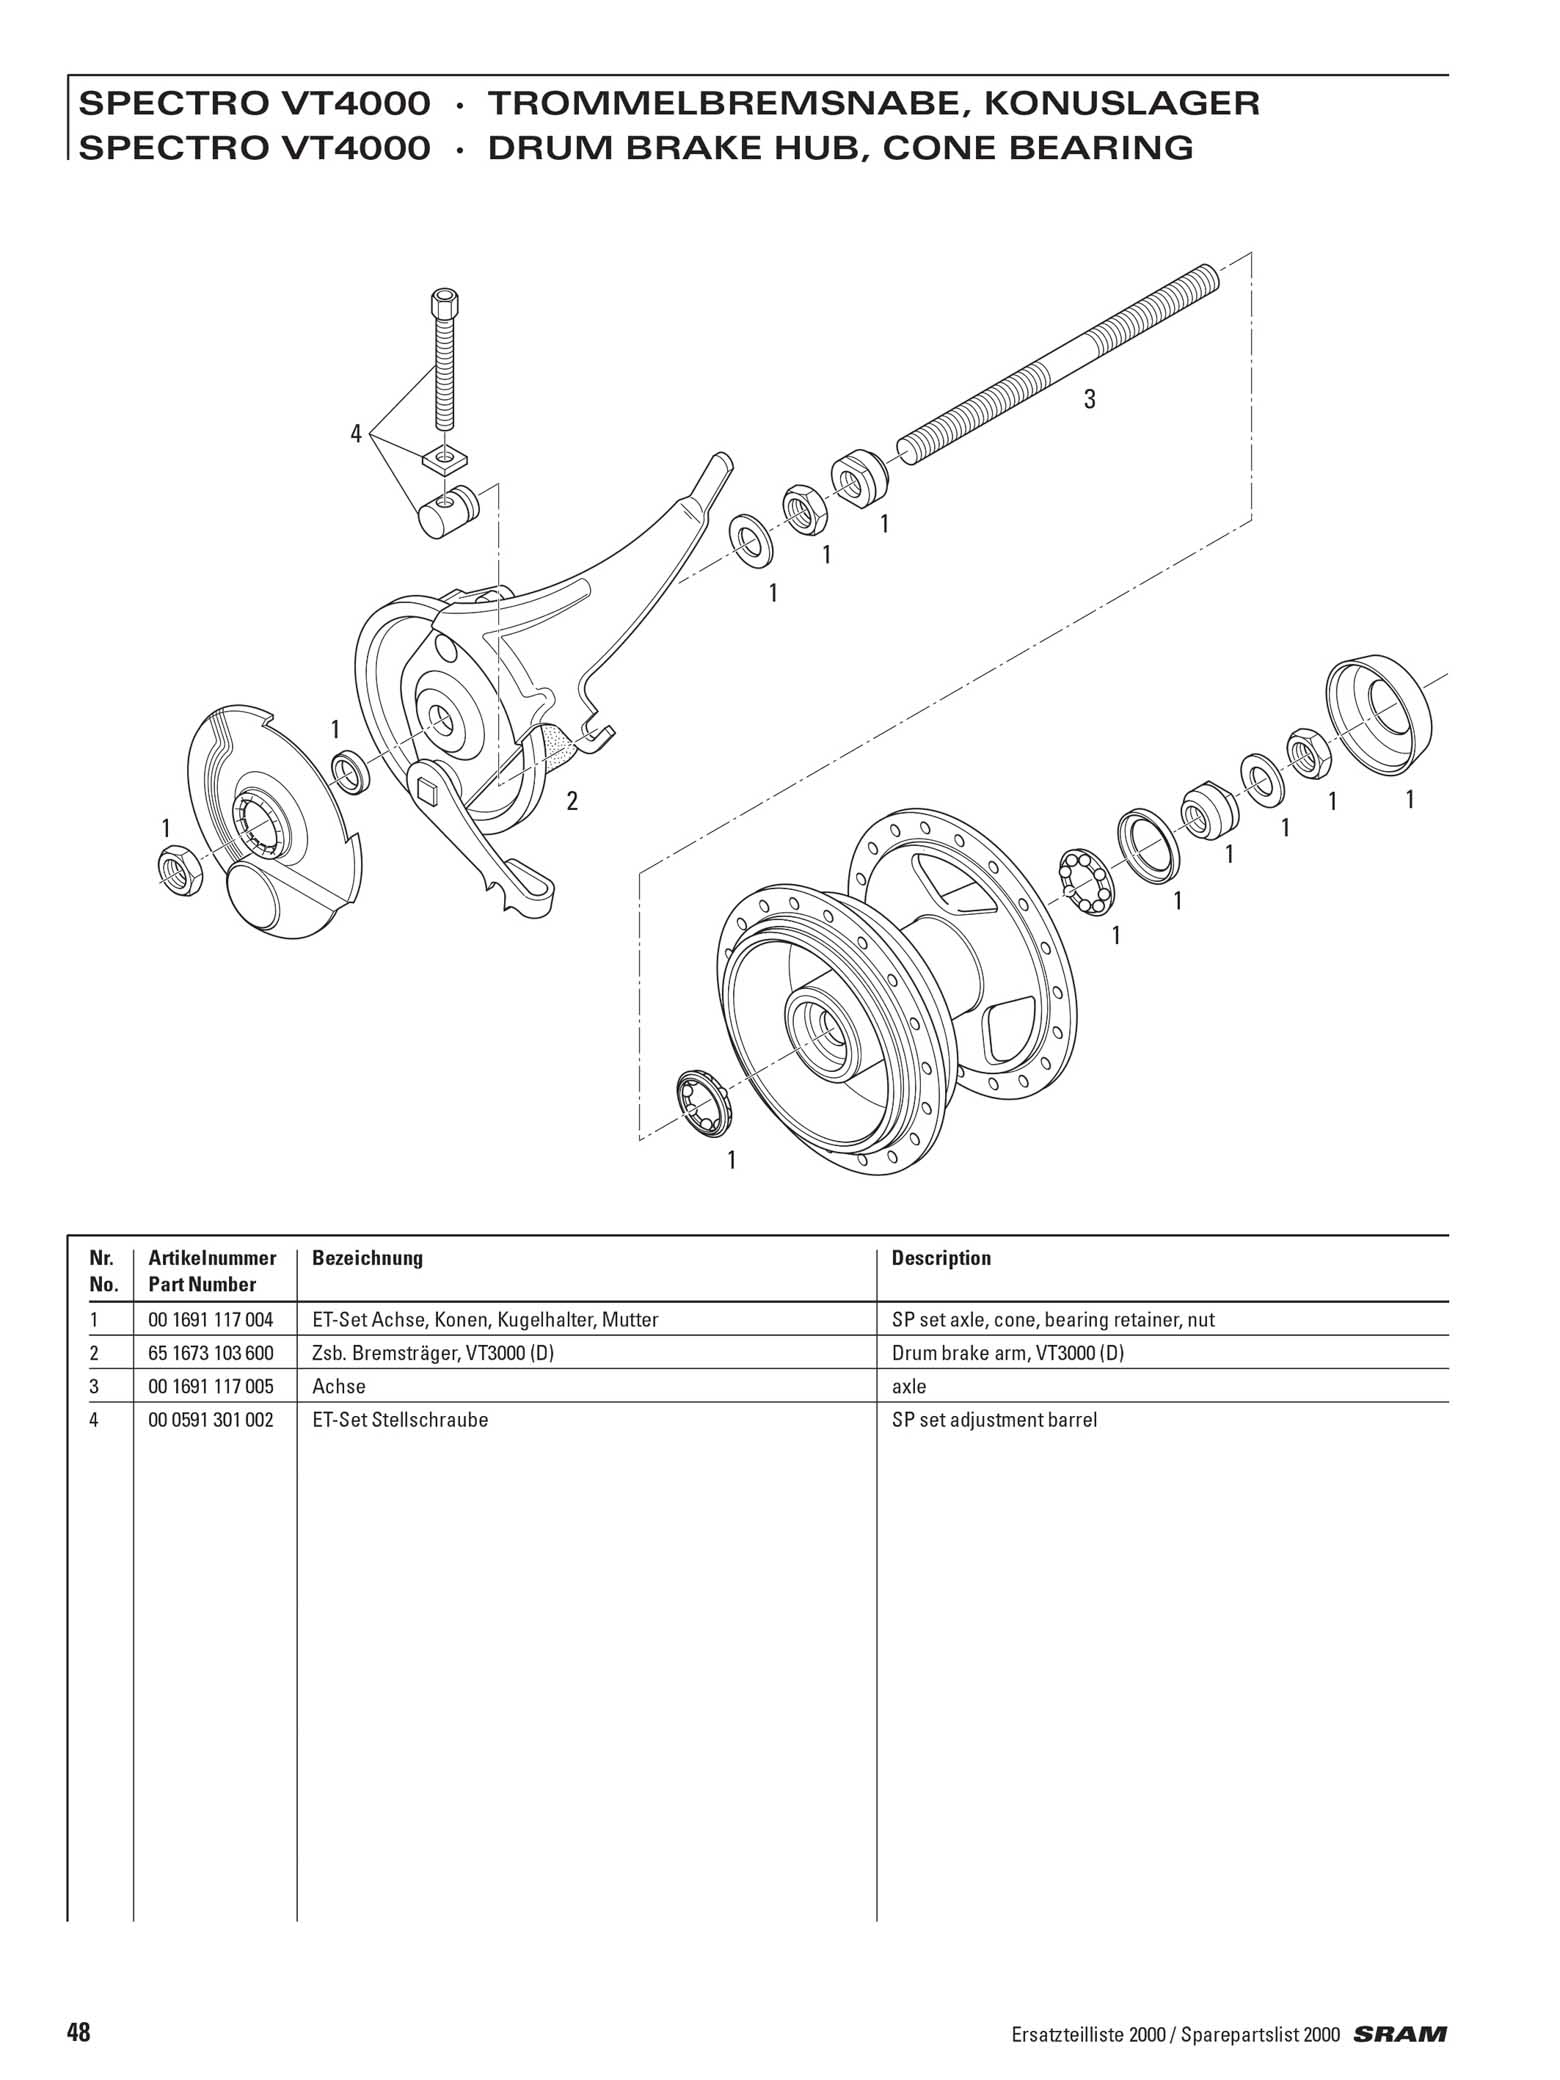 SRAM - Spare Parts List 2000 page 048 main image